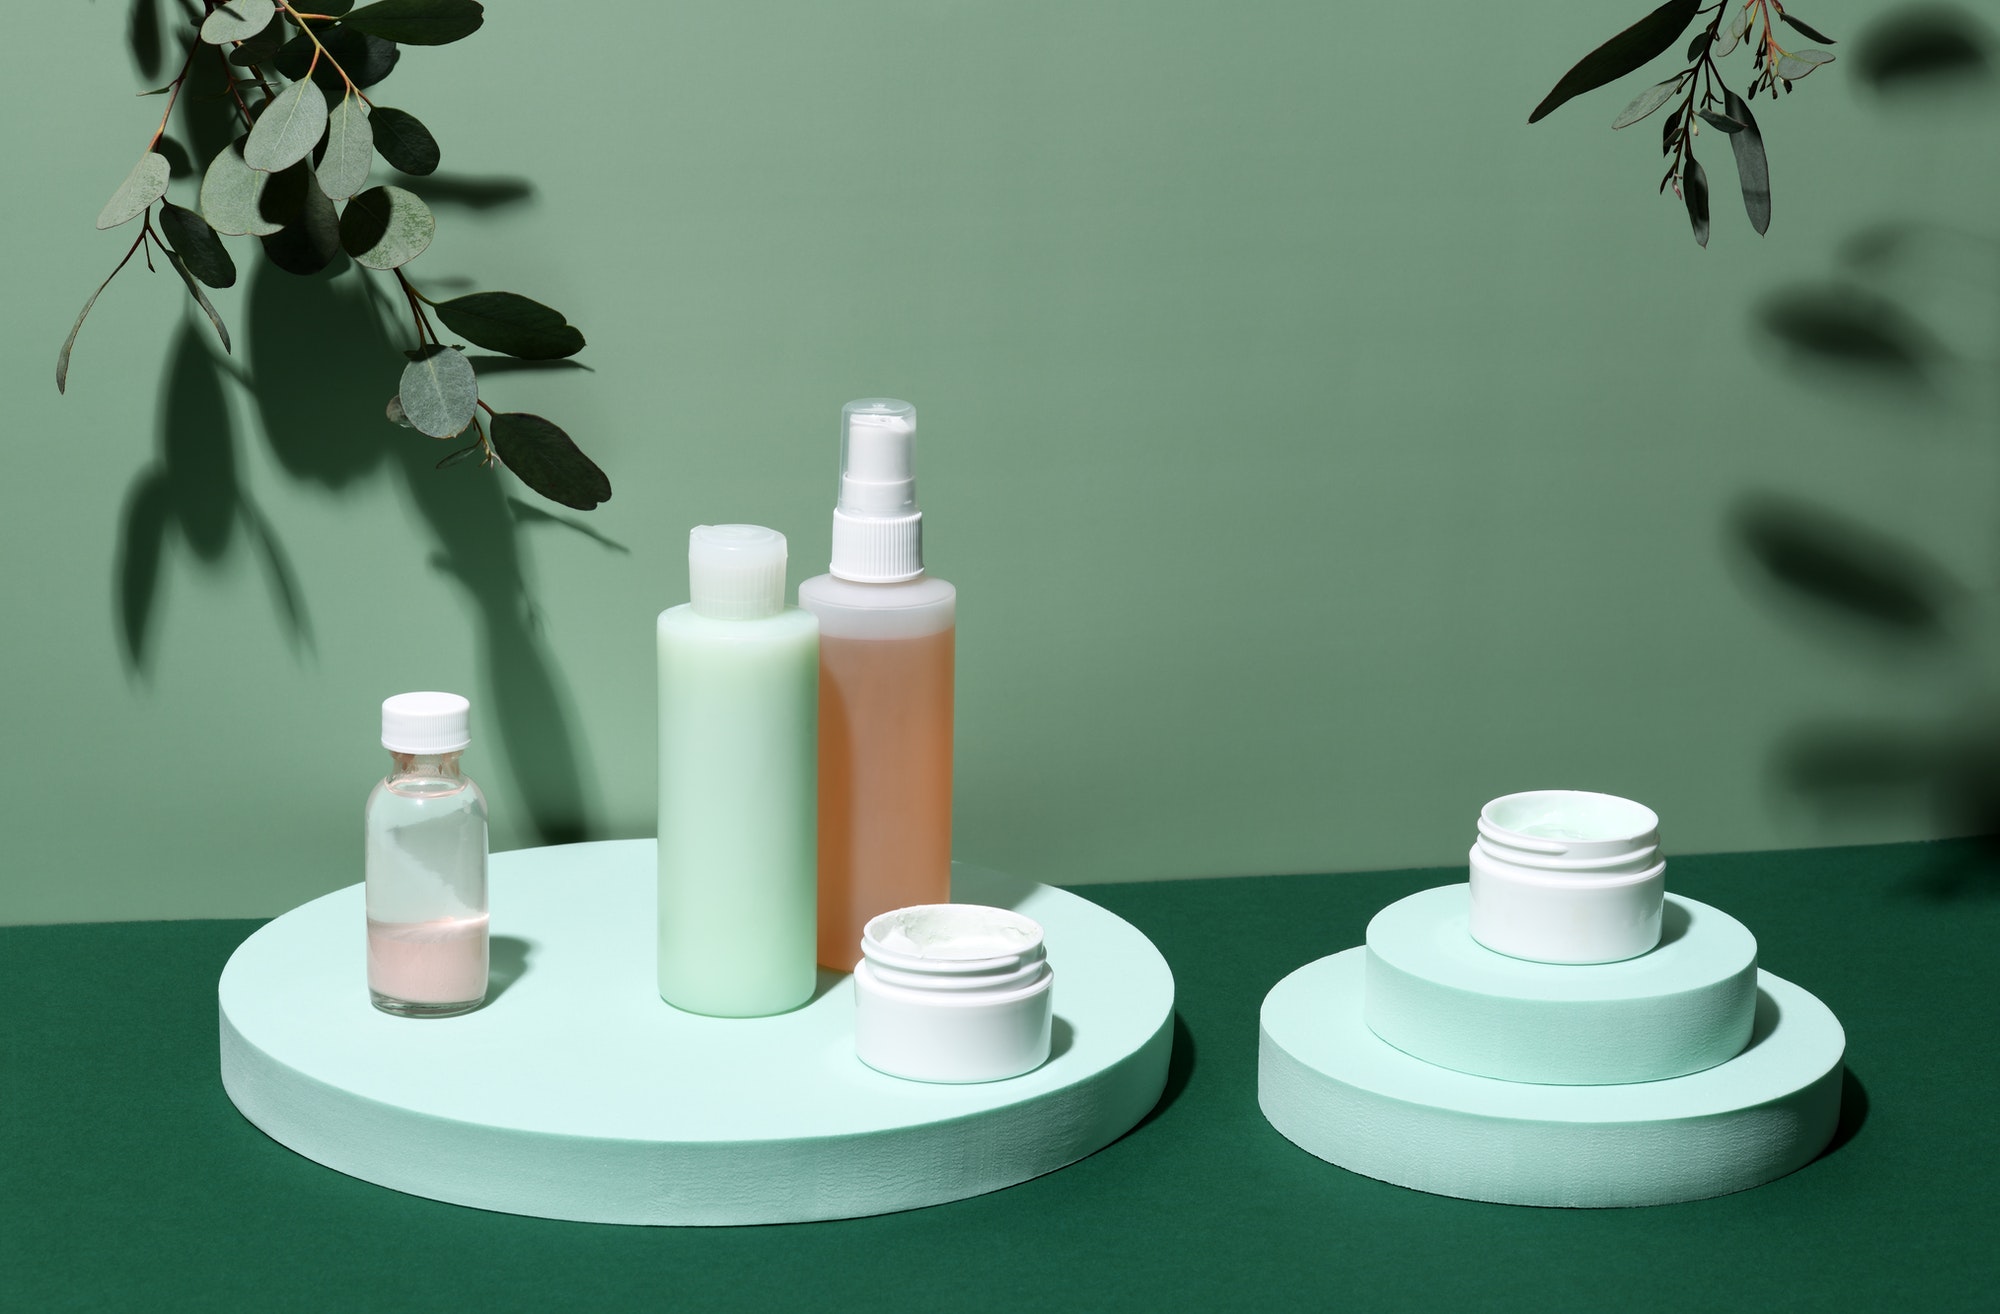 Arrangement of skin care products